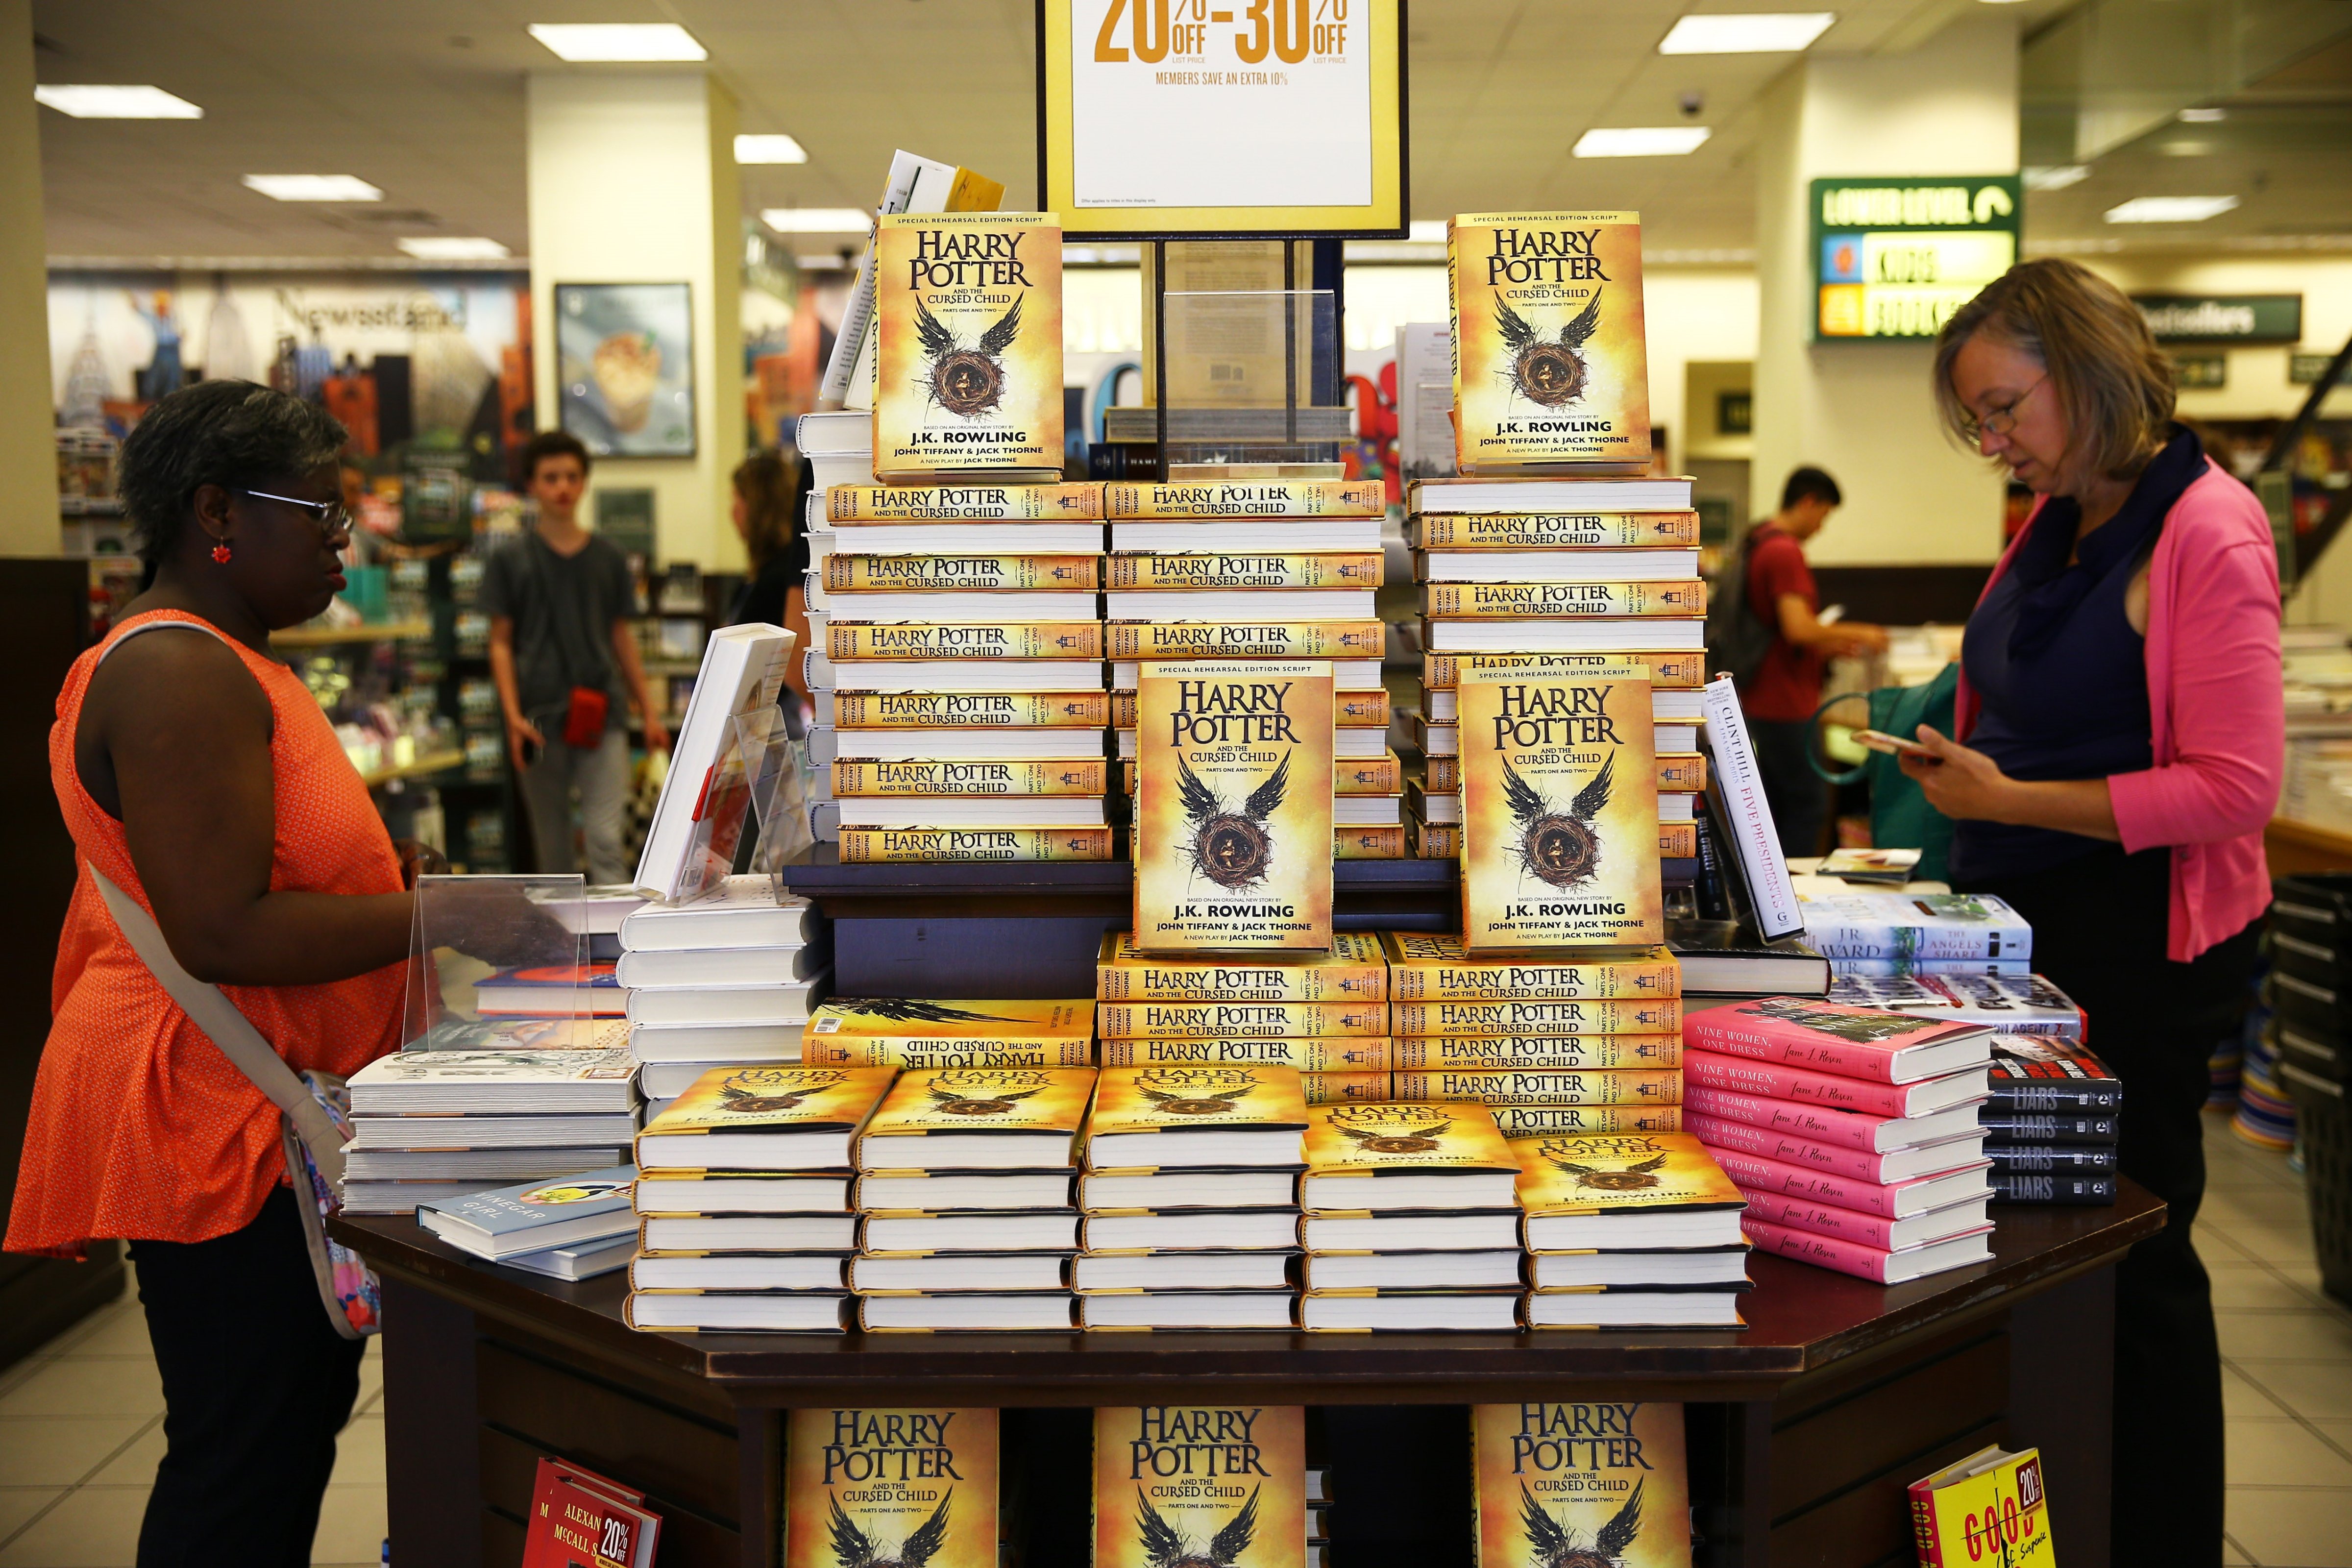 Copies of British author J.K. Rowling's latest book, Harry Potter and the Cursed Child, on display at a bookstore in New York, United States on August 3, 2016. (Volkan Furuncu&mdash;Anadolu Agency/Getty Images)